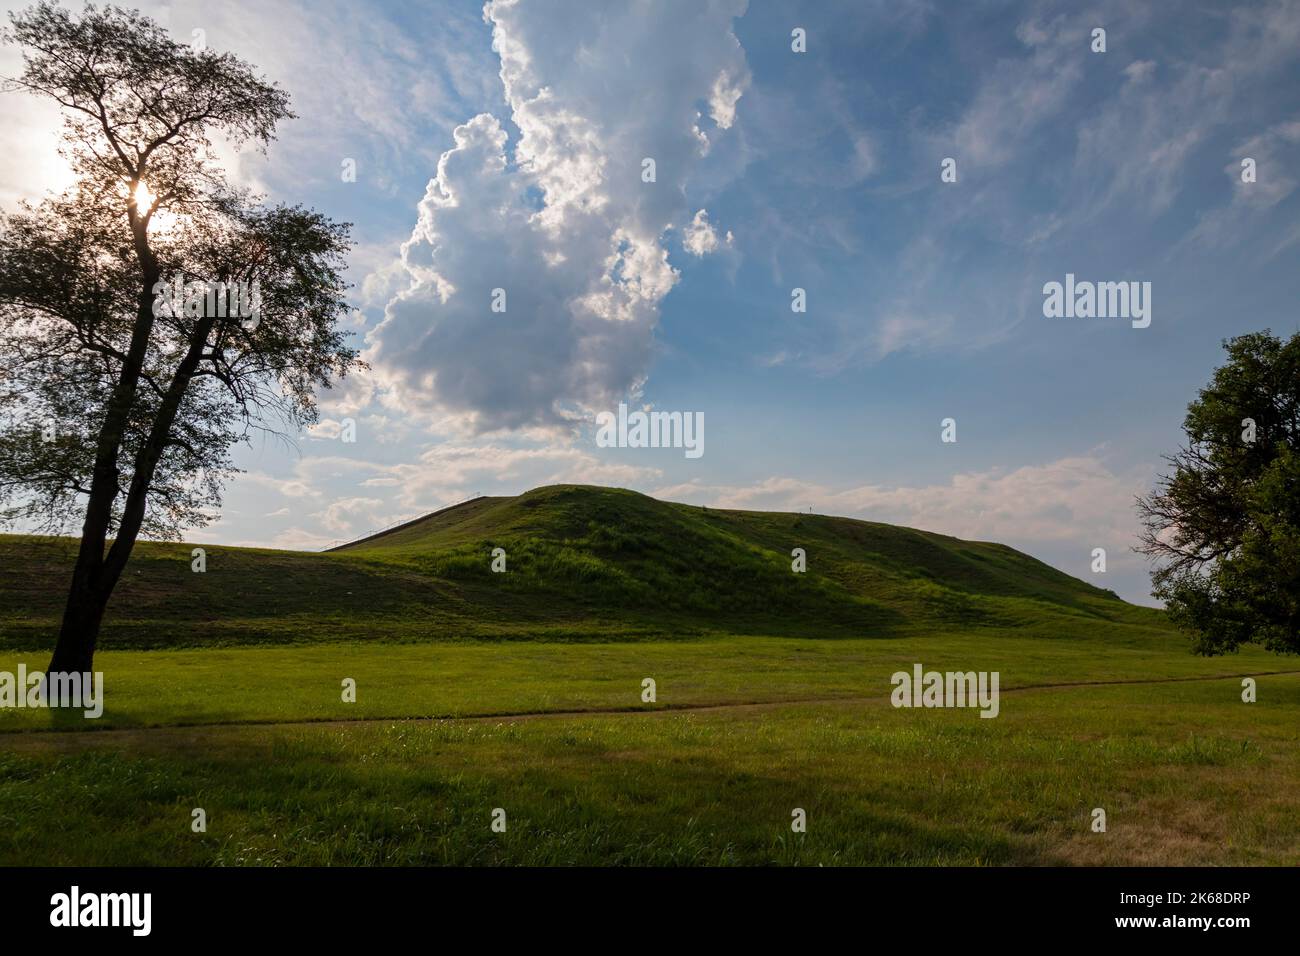 Collinsville, Illinois - Monks Mound at Chokia Mounds State Historic Site. Covering 14 acres and 100 feet high, Monks Mound is the largest prehistoric Stock Photo